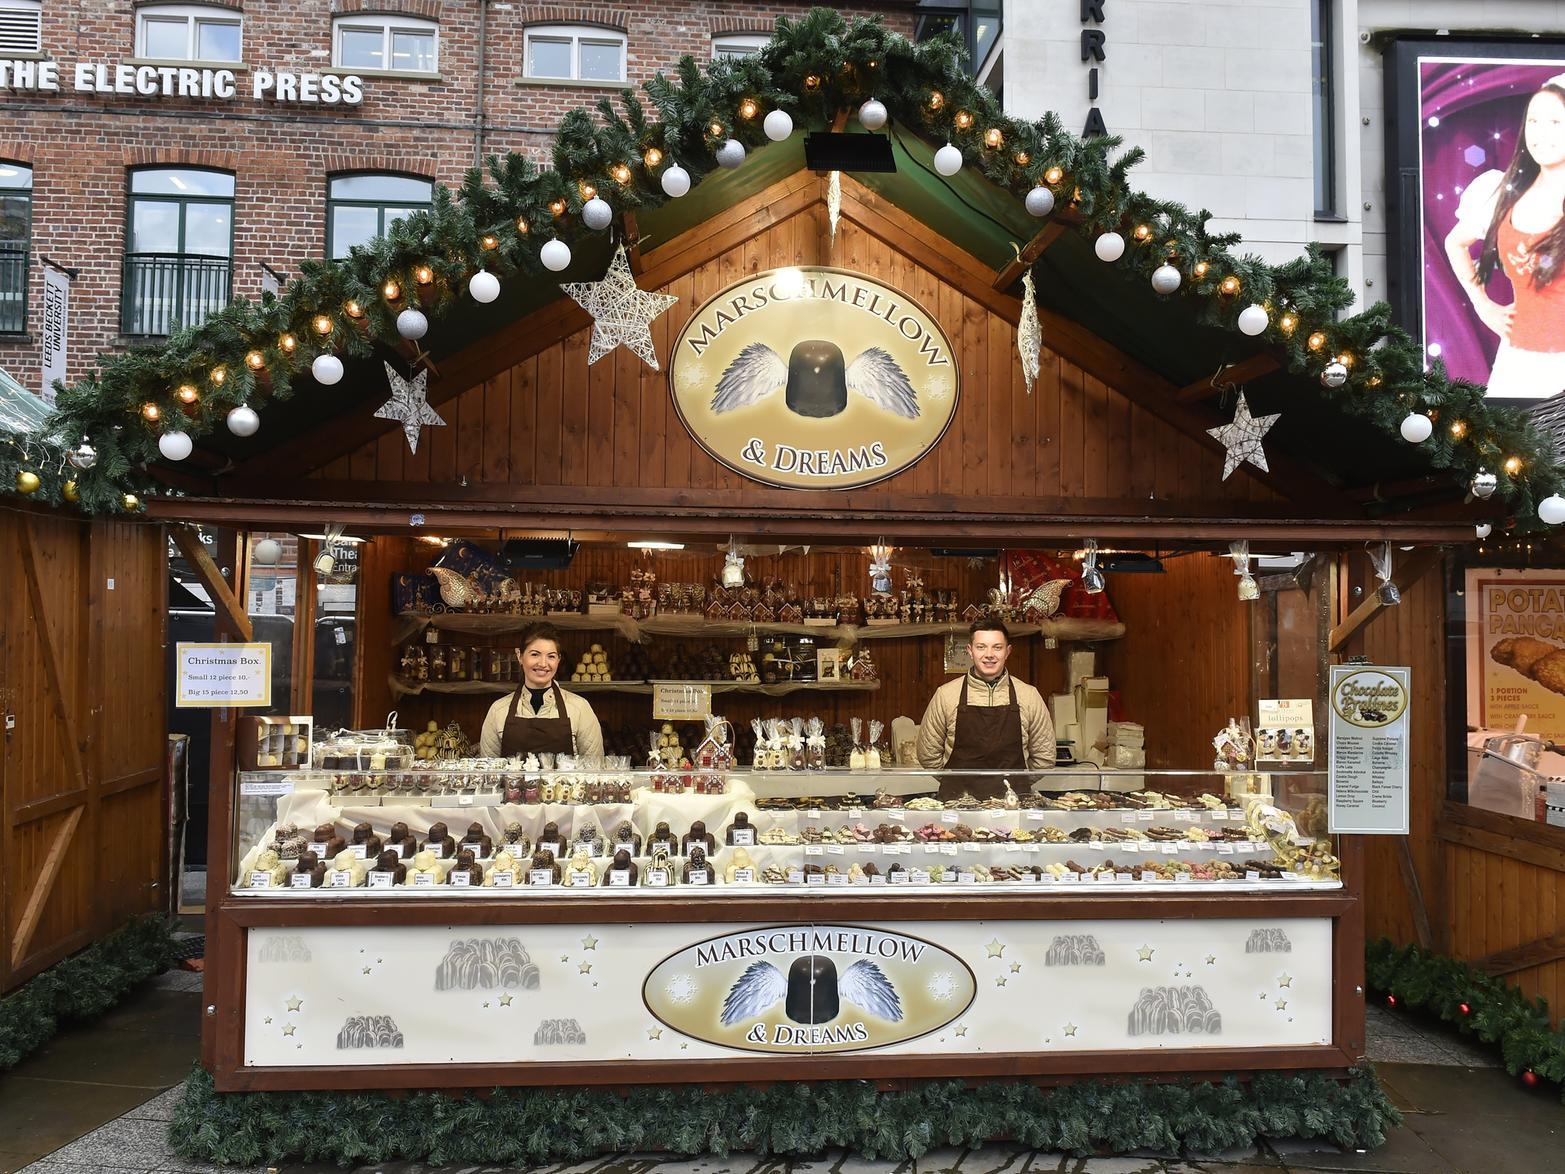 There are plenty of authentic German foods and drinks to choose from in the Leeds German Market.